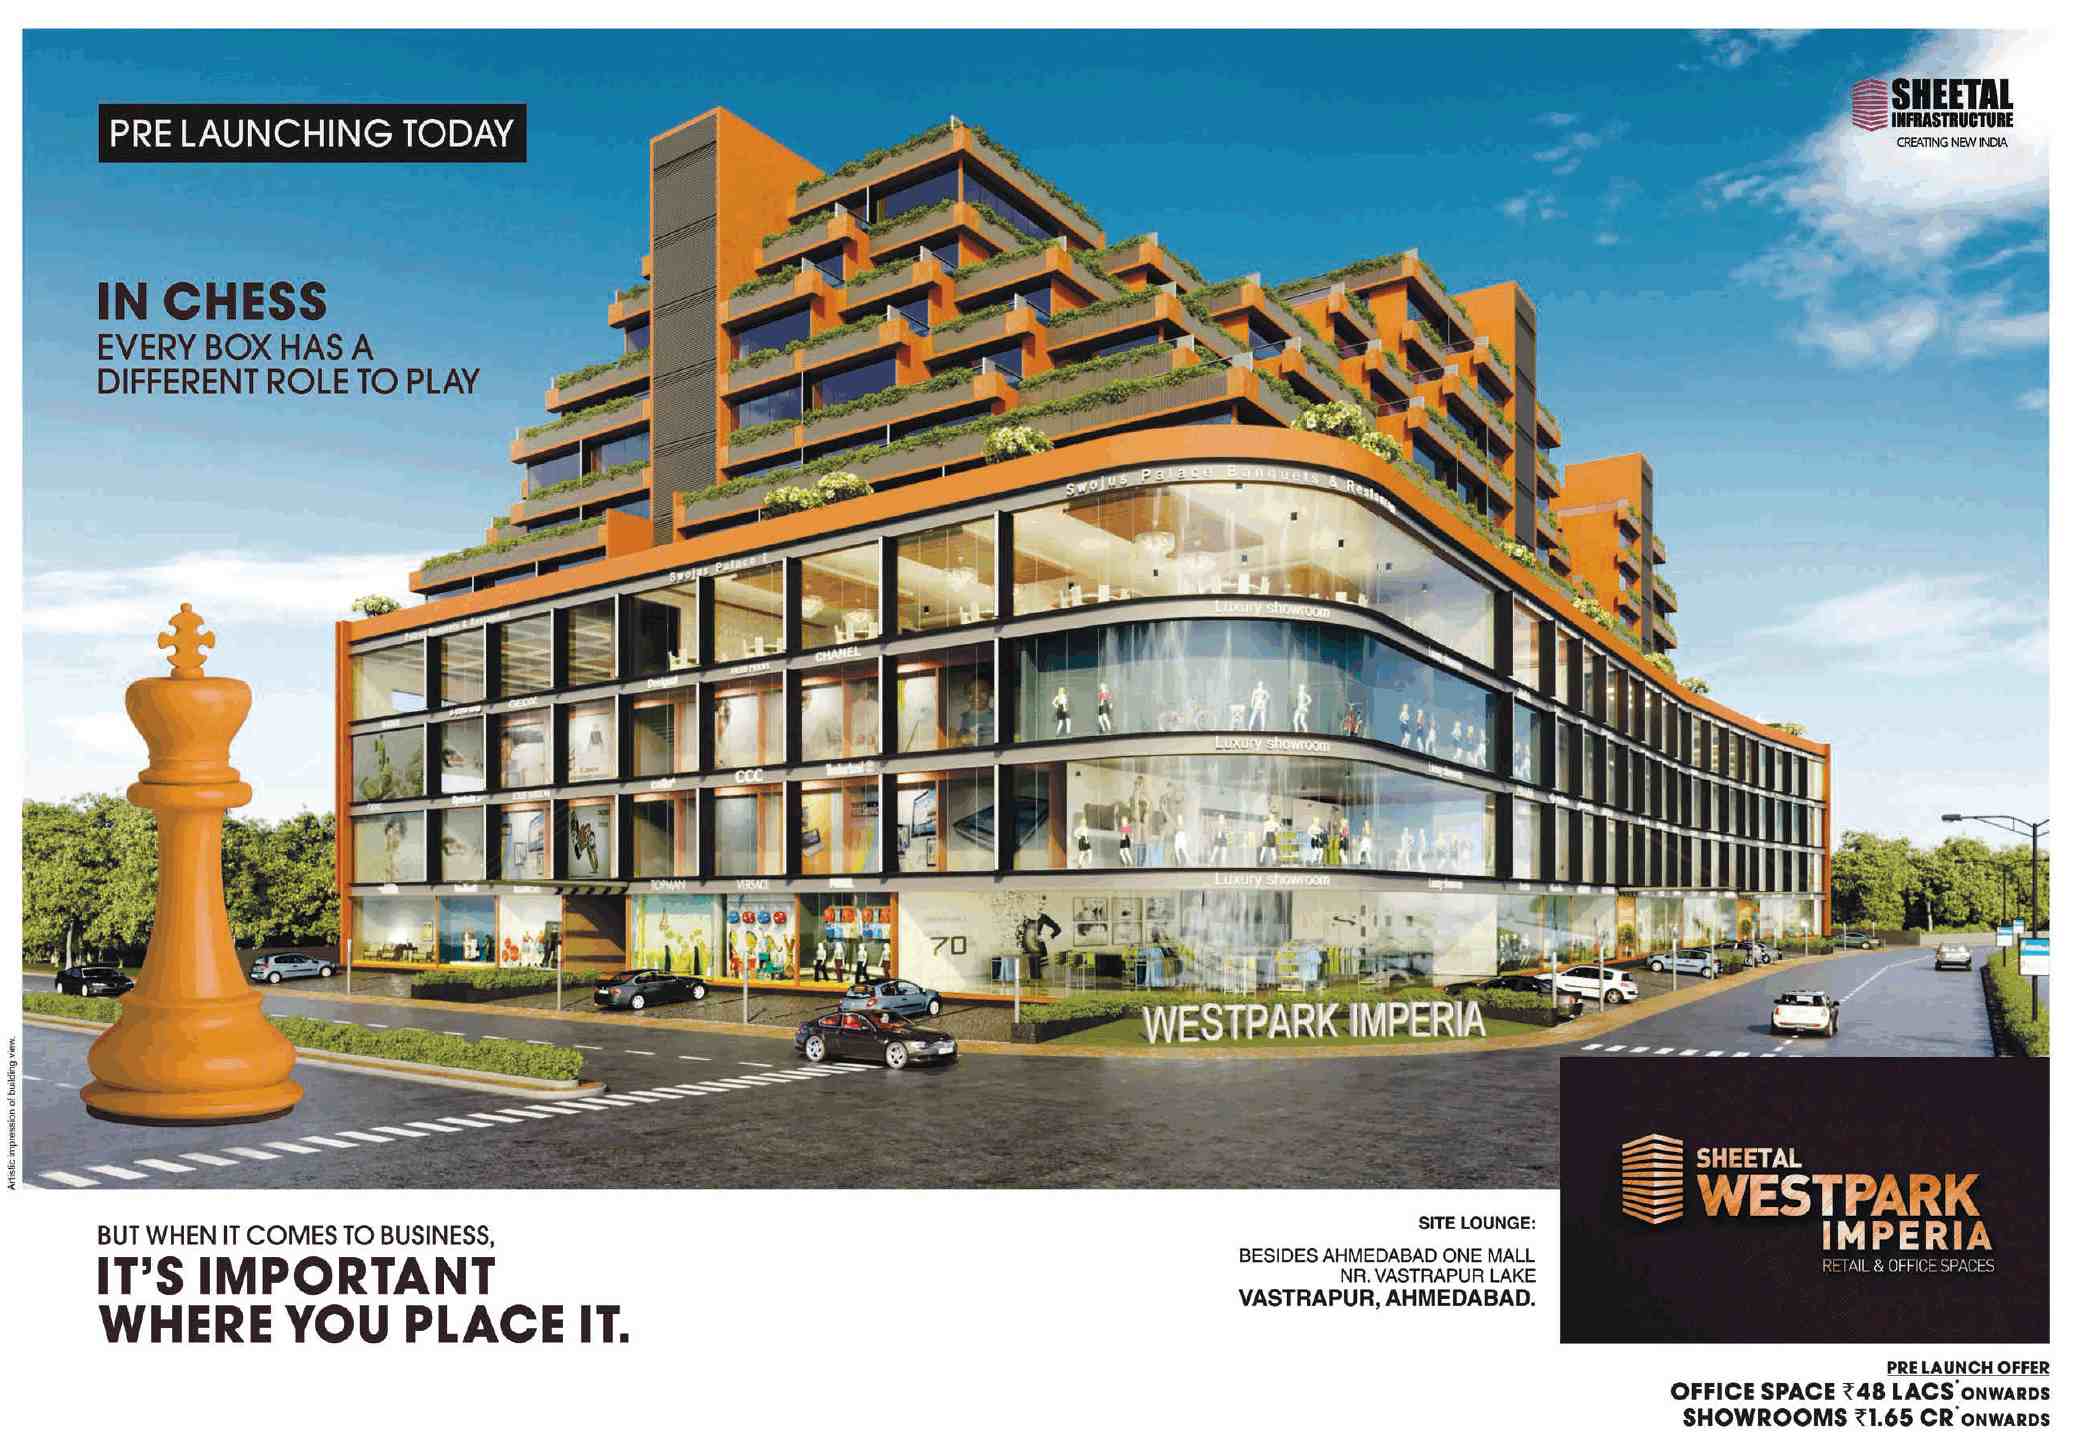 Avail the Pre-Launch offer at Sheetal Westpark Imperia in Ahmedabad Update